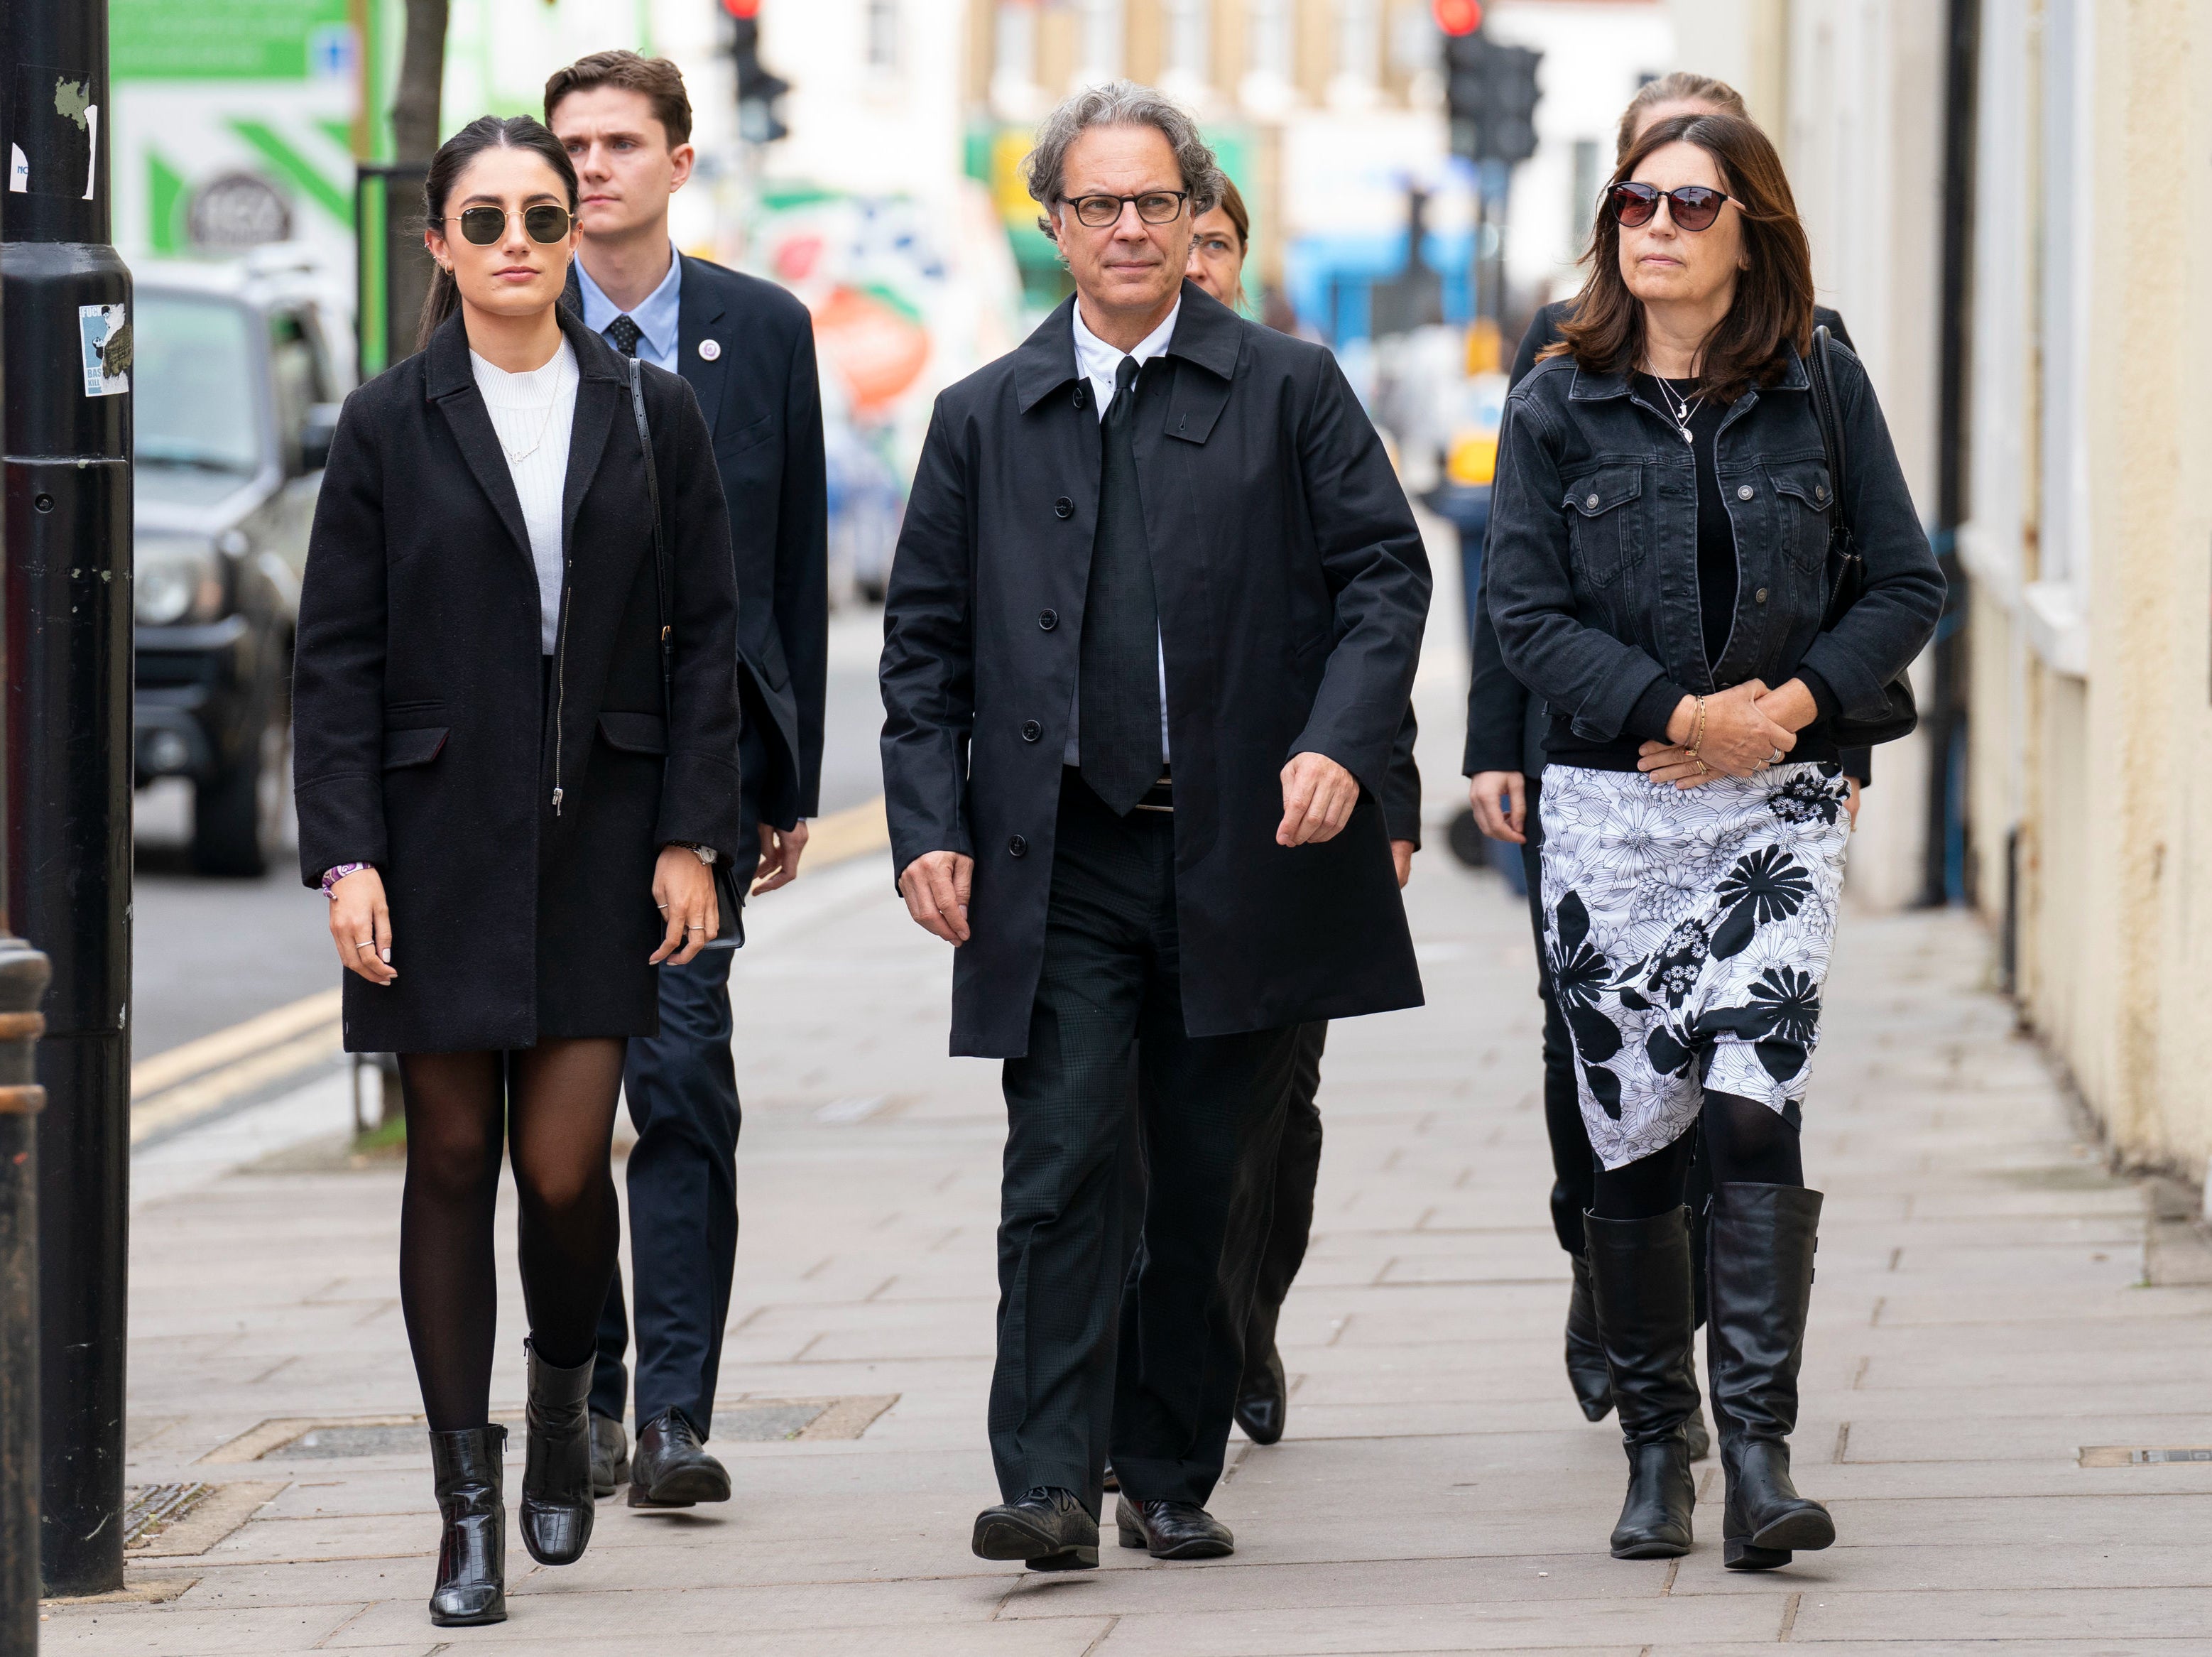 Molly Russell’s father Ian Russell (centre), mother Janet Russell (right) and her sister (left) arrive at Barnet Coroner’s Court on the first day of the inquest into her death